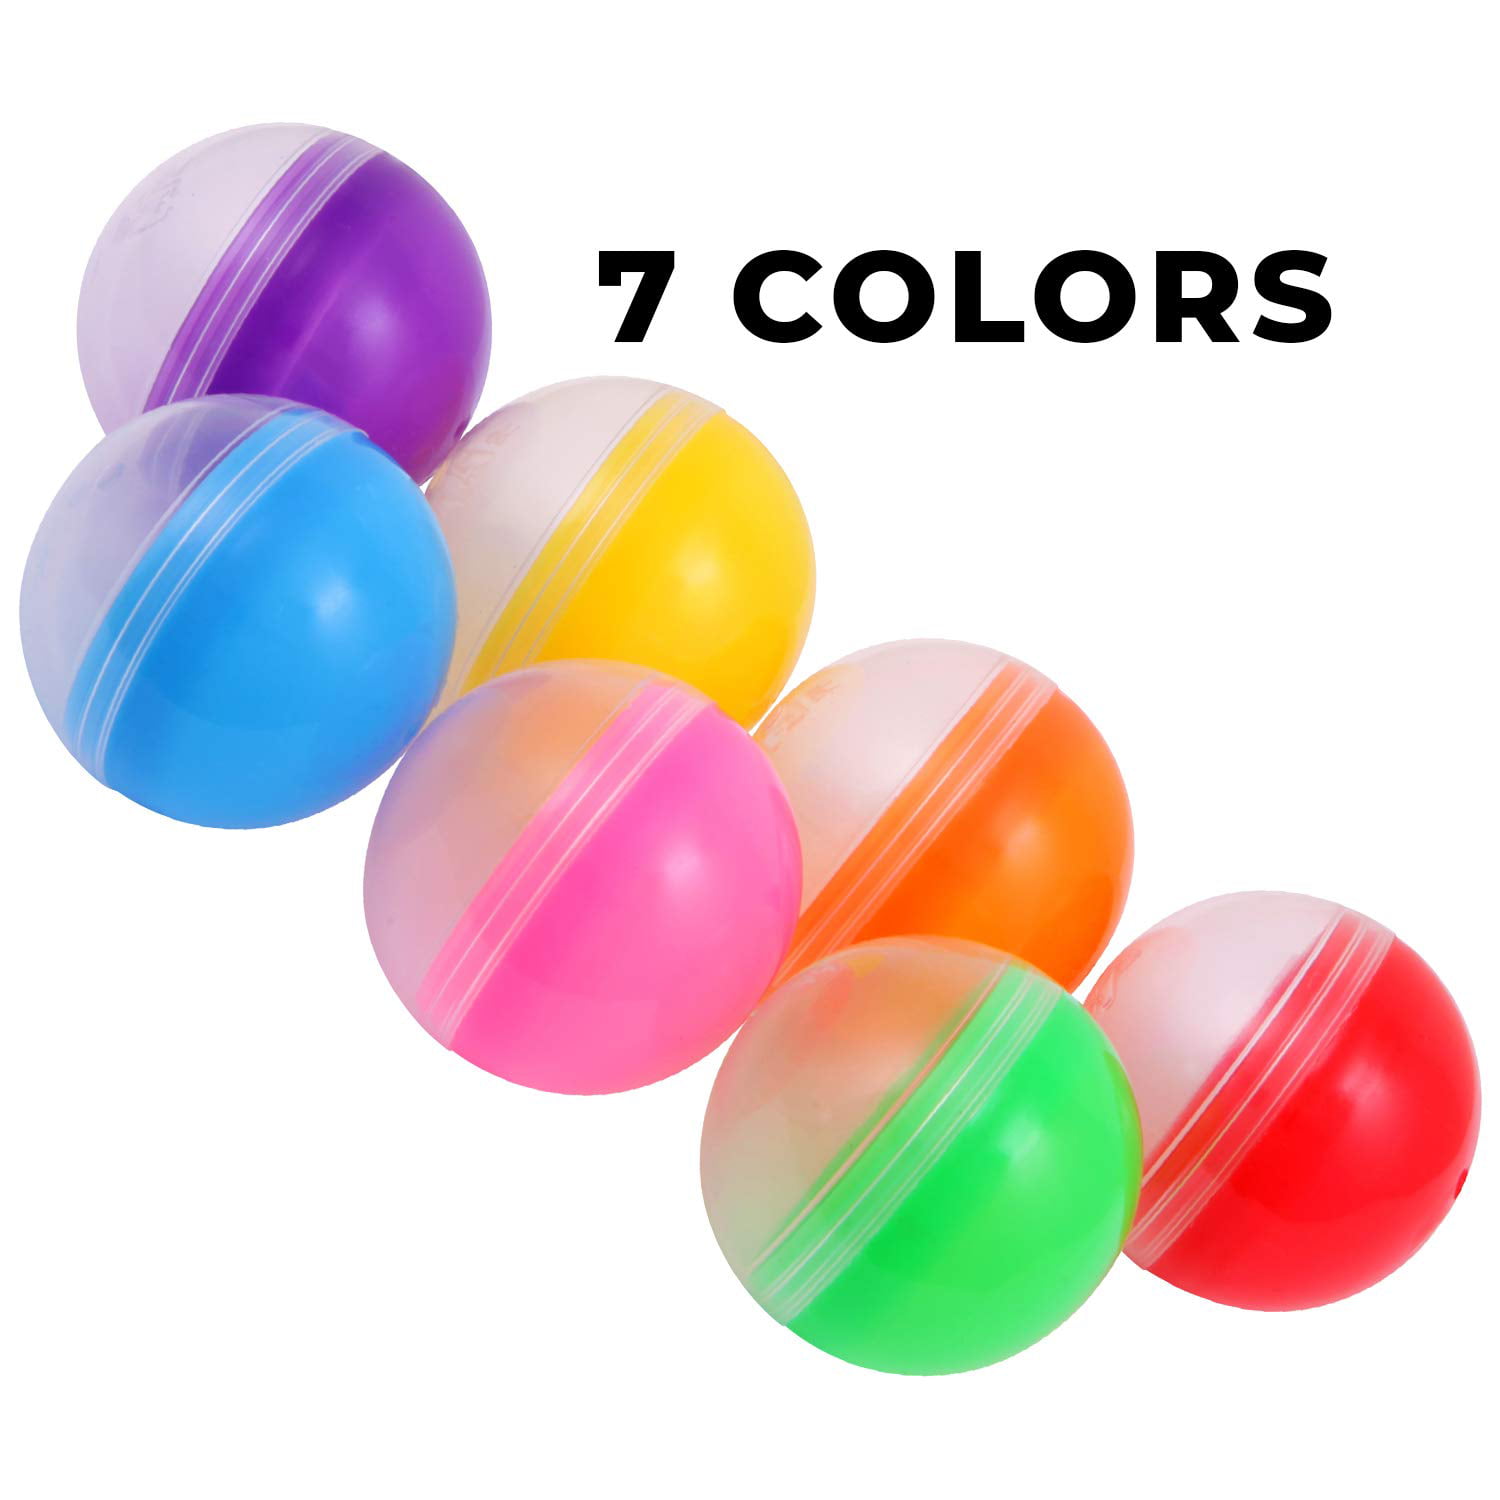 Empty Clear-Colored Round Capsules 2 inch 50 pcs Bulk 7 Colors Capsule For  Toy Gumball Machines Plastic Containers Surprise For Kids Party Favor Prize